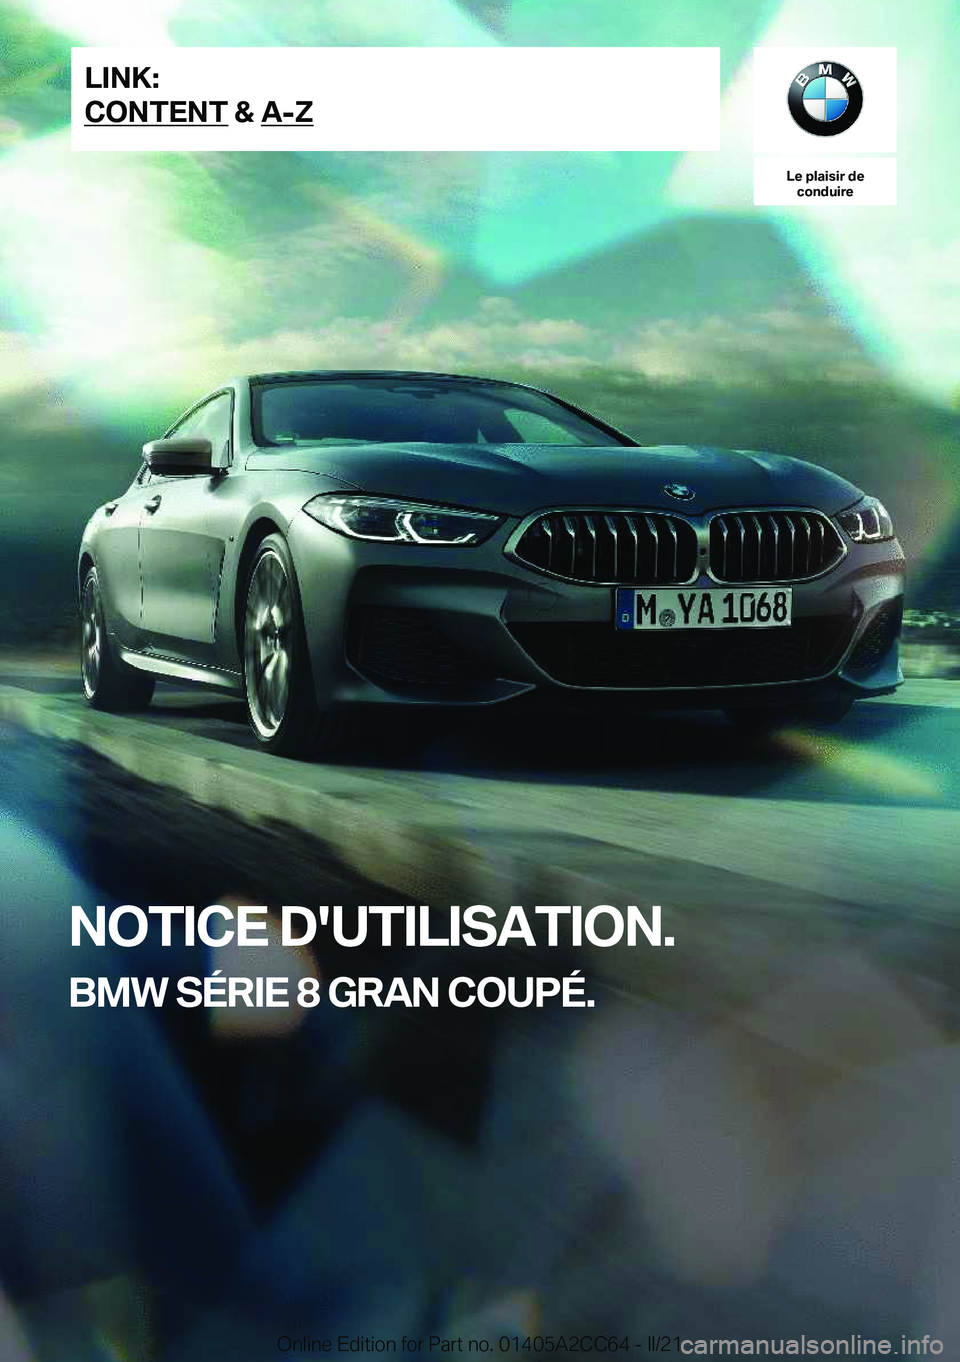 BMW 8 SERIES GRAN COUPE 2022  Notices Demploi (in French) �L�e��p�l�a�i�s�i�r��d�e�c�o�n�d�u�i�r�e
�N�O�T�I�C�E��D�'�U�T�I�L�I�S�A�T�I�O�N�.
�B�M�W��S�